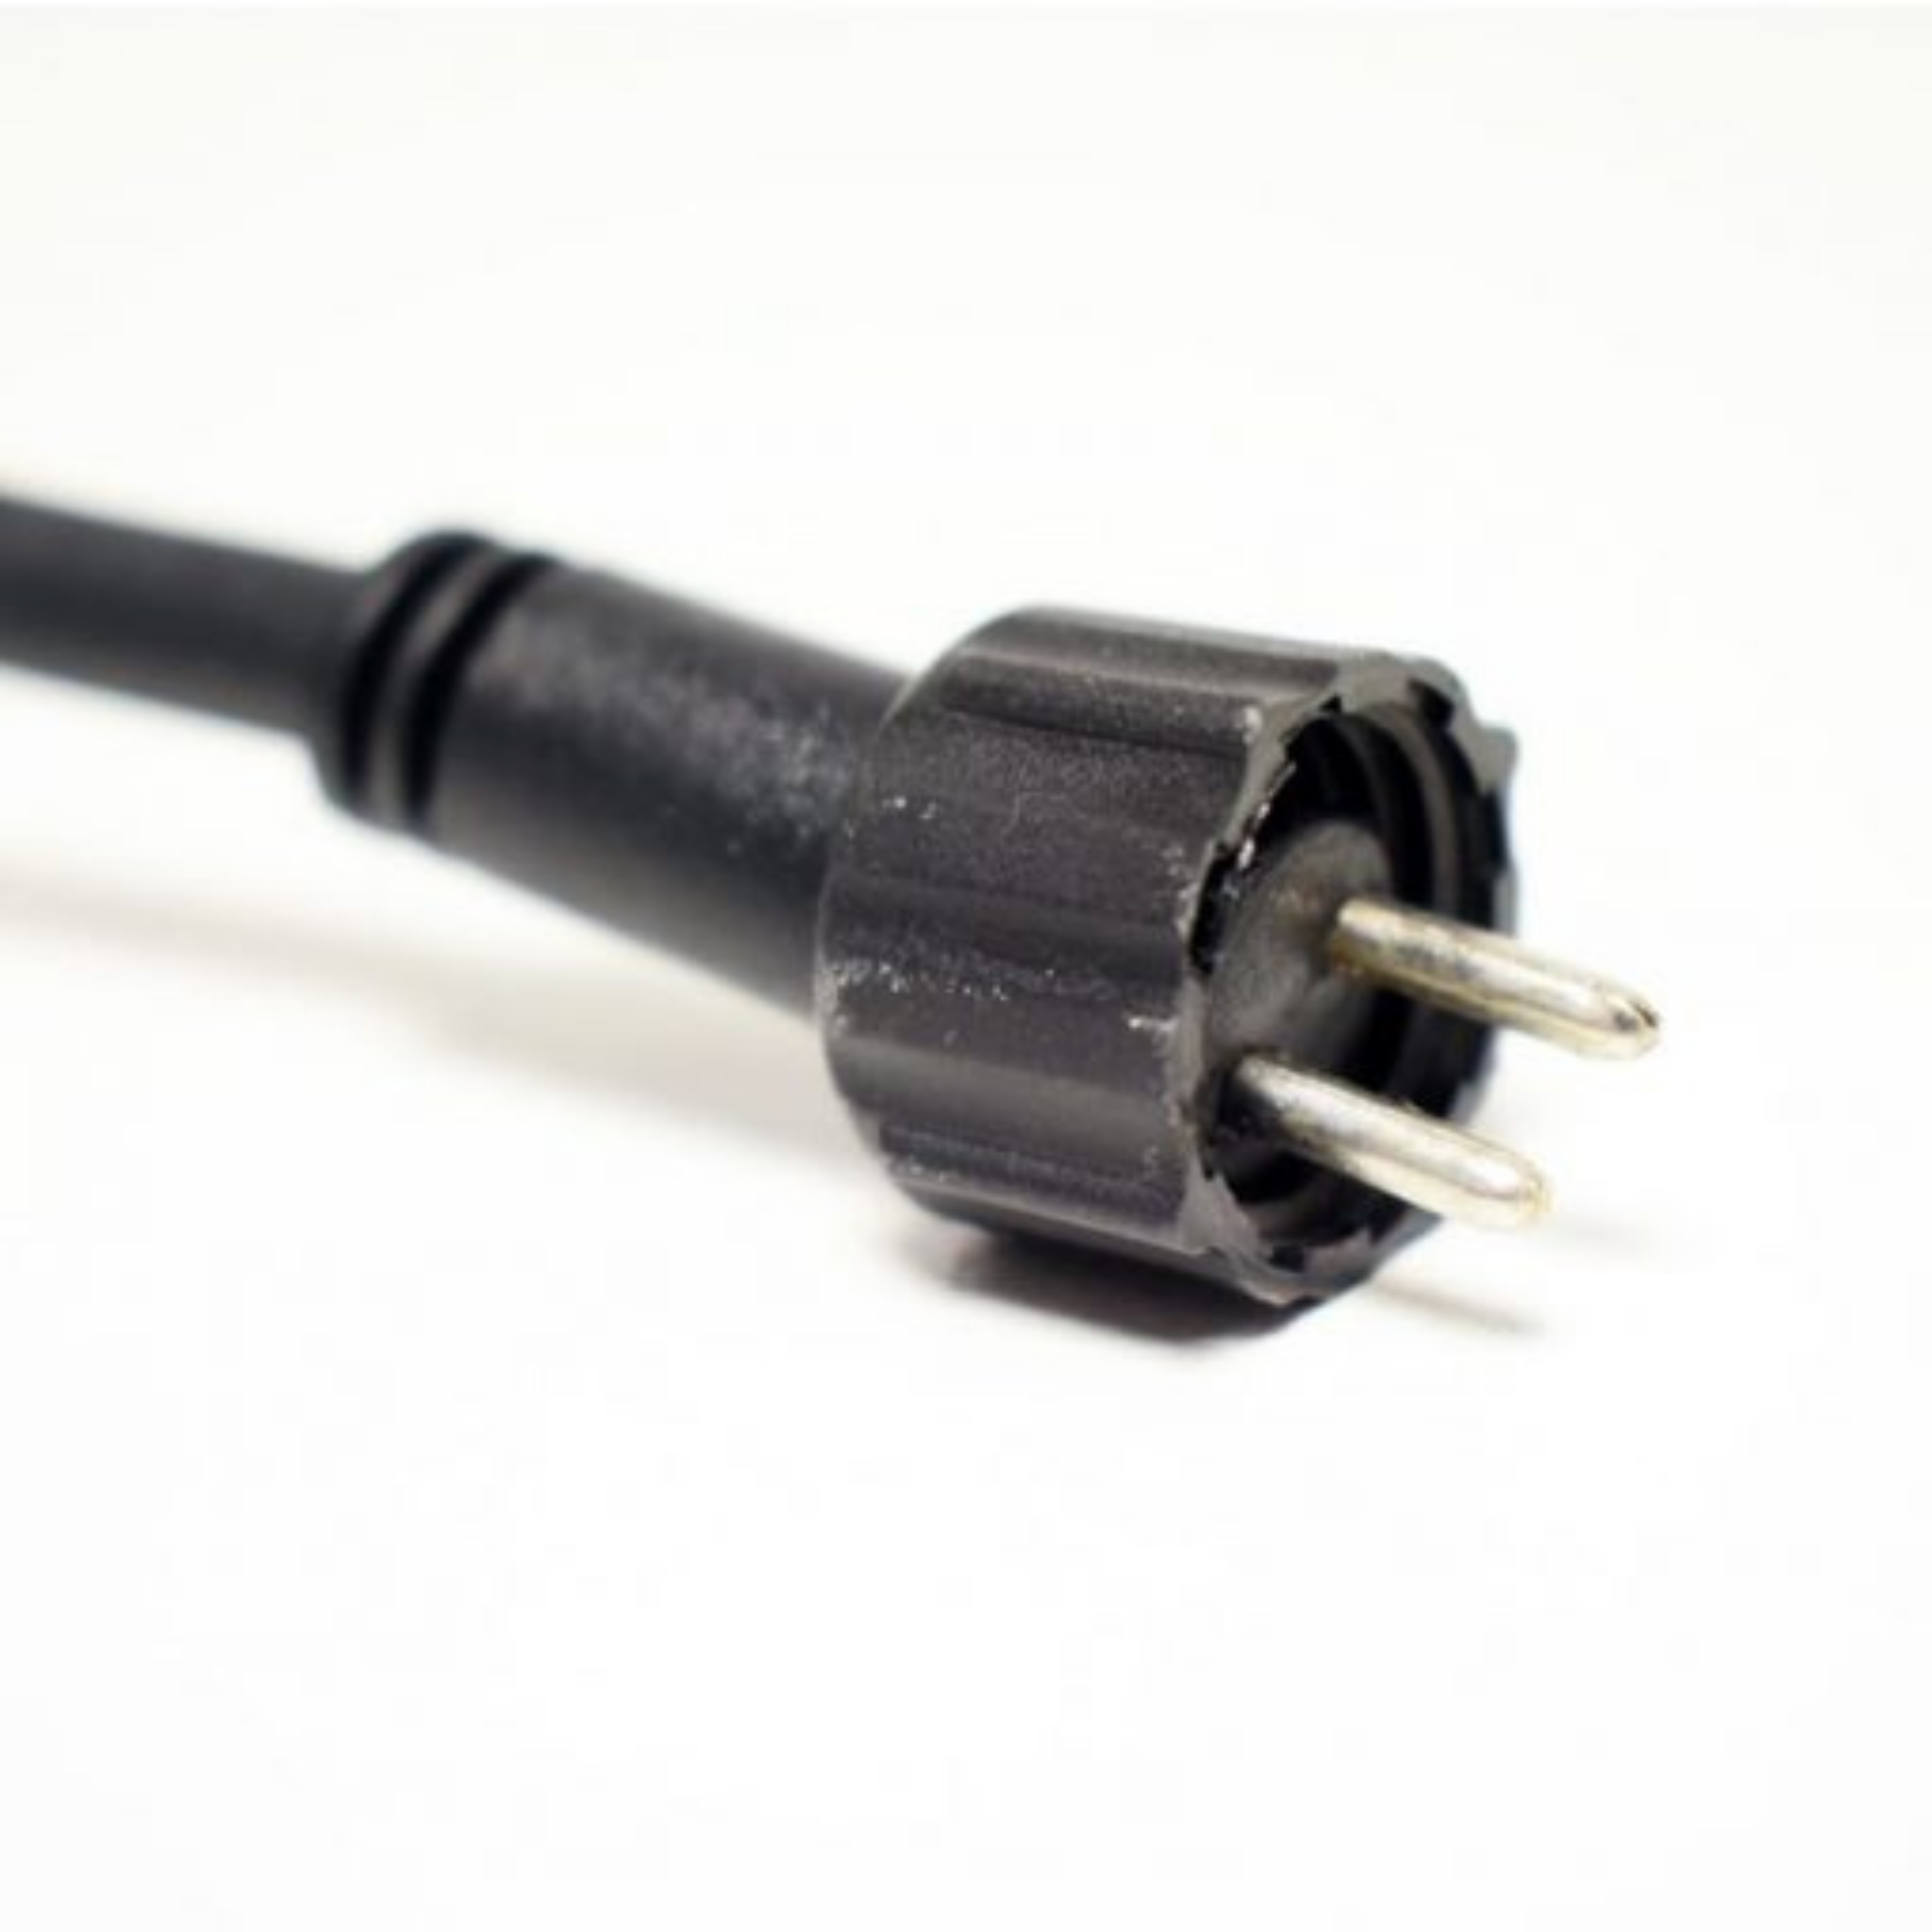 5m Extension Cable